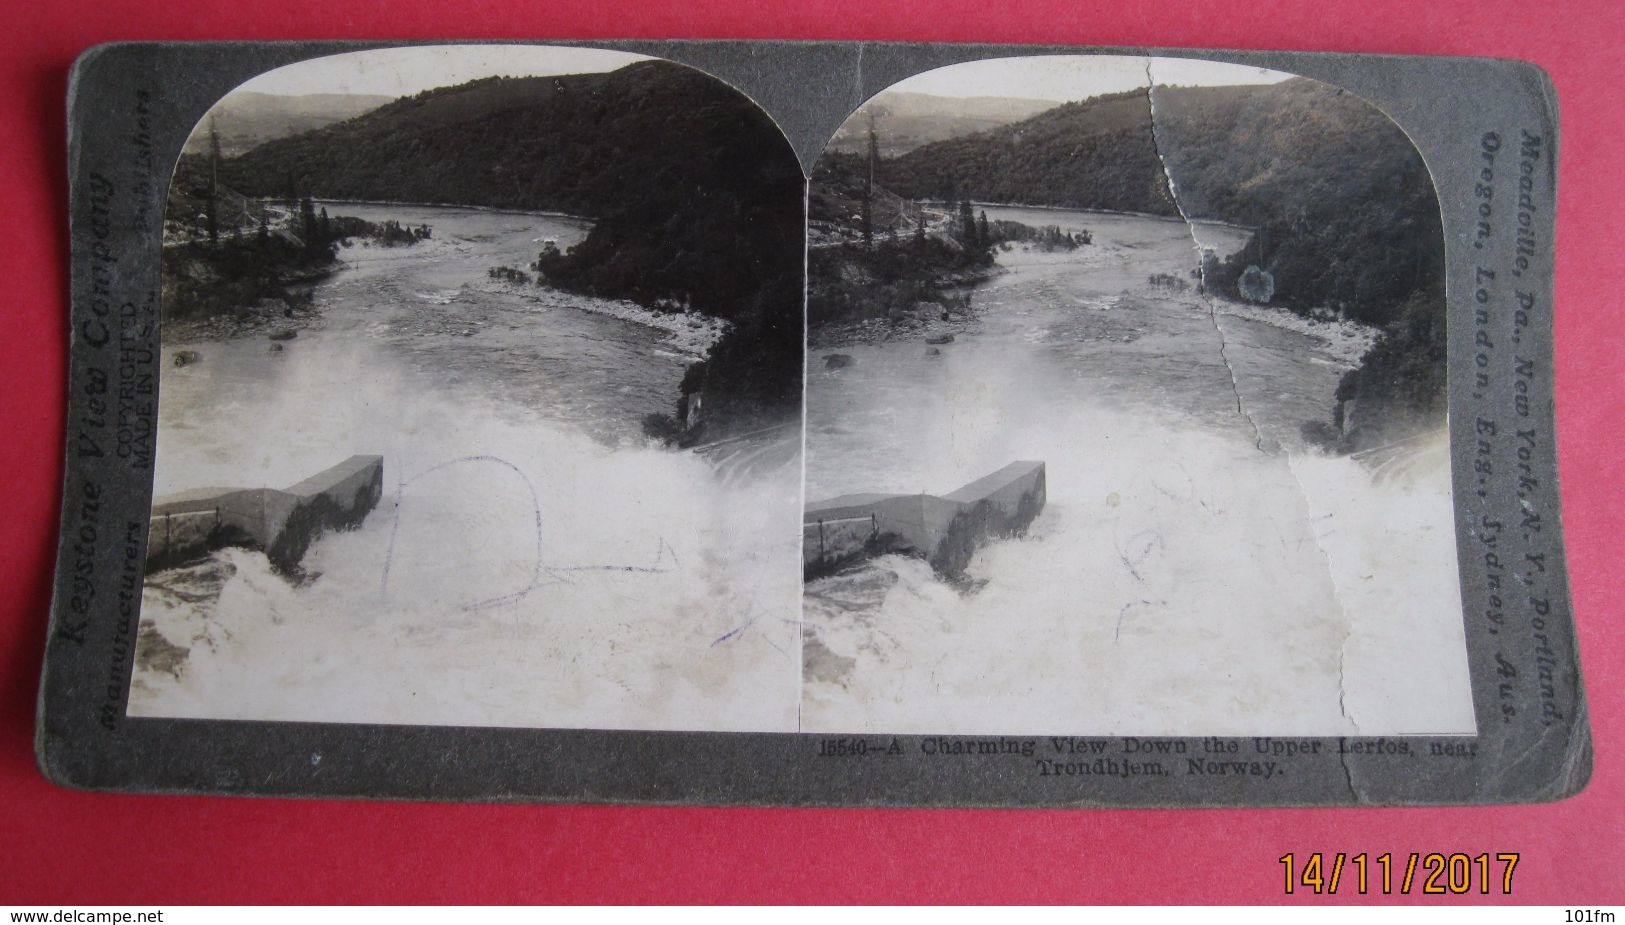 CARTE STEREOSCOPIQUE  - NORWAY - TRONDHJEM, LERFOS,  STEREO PHOTO - Stereoscope Cards